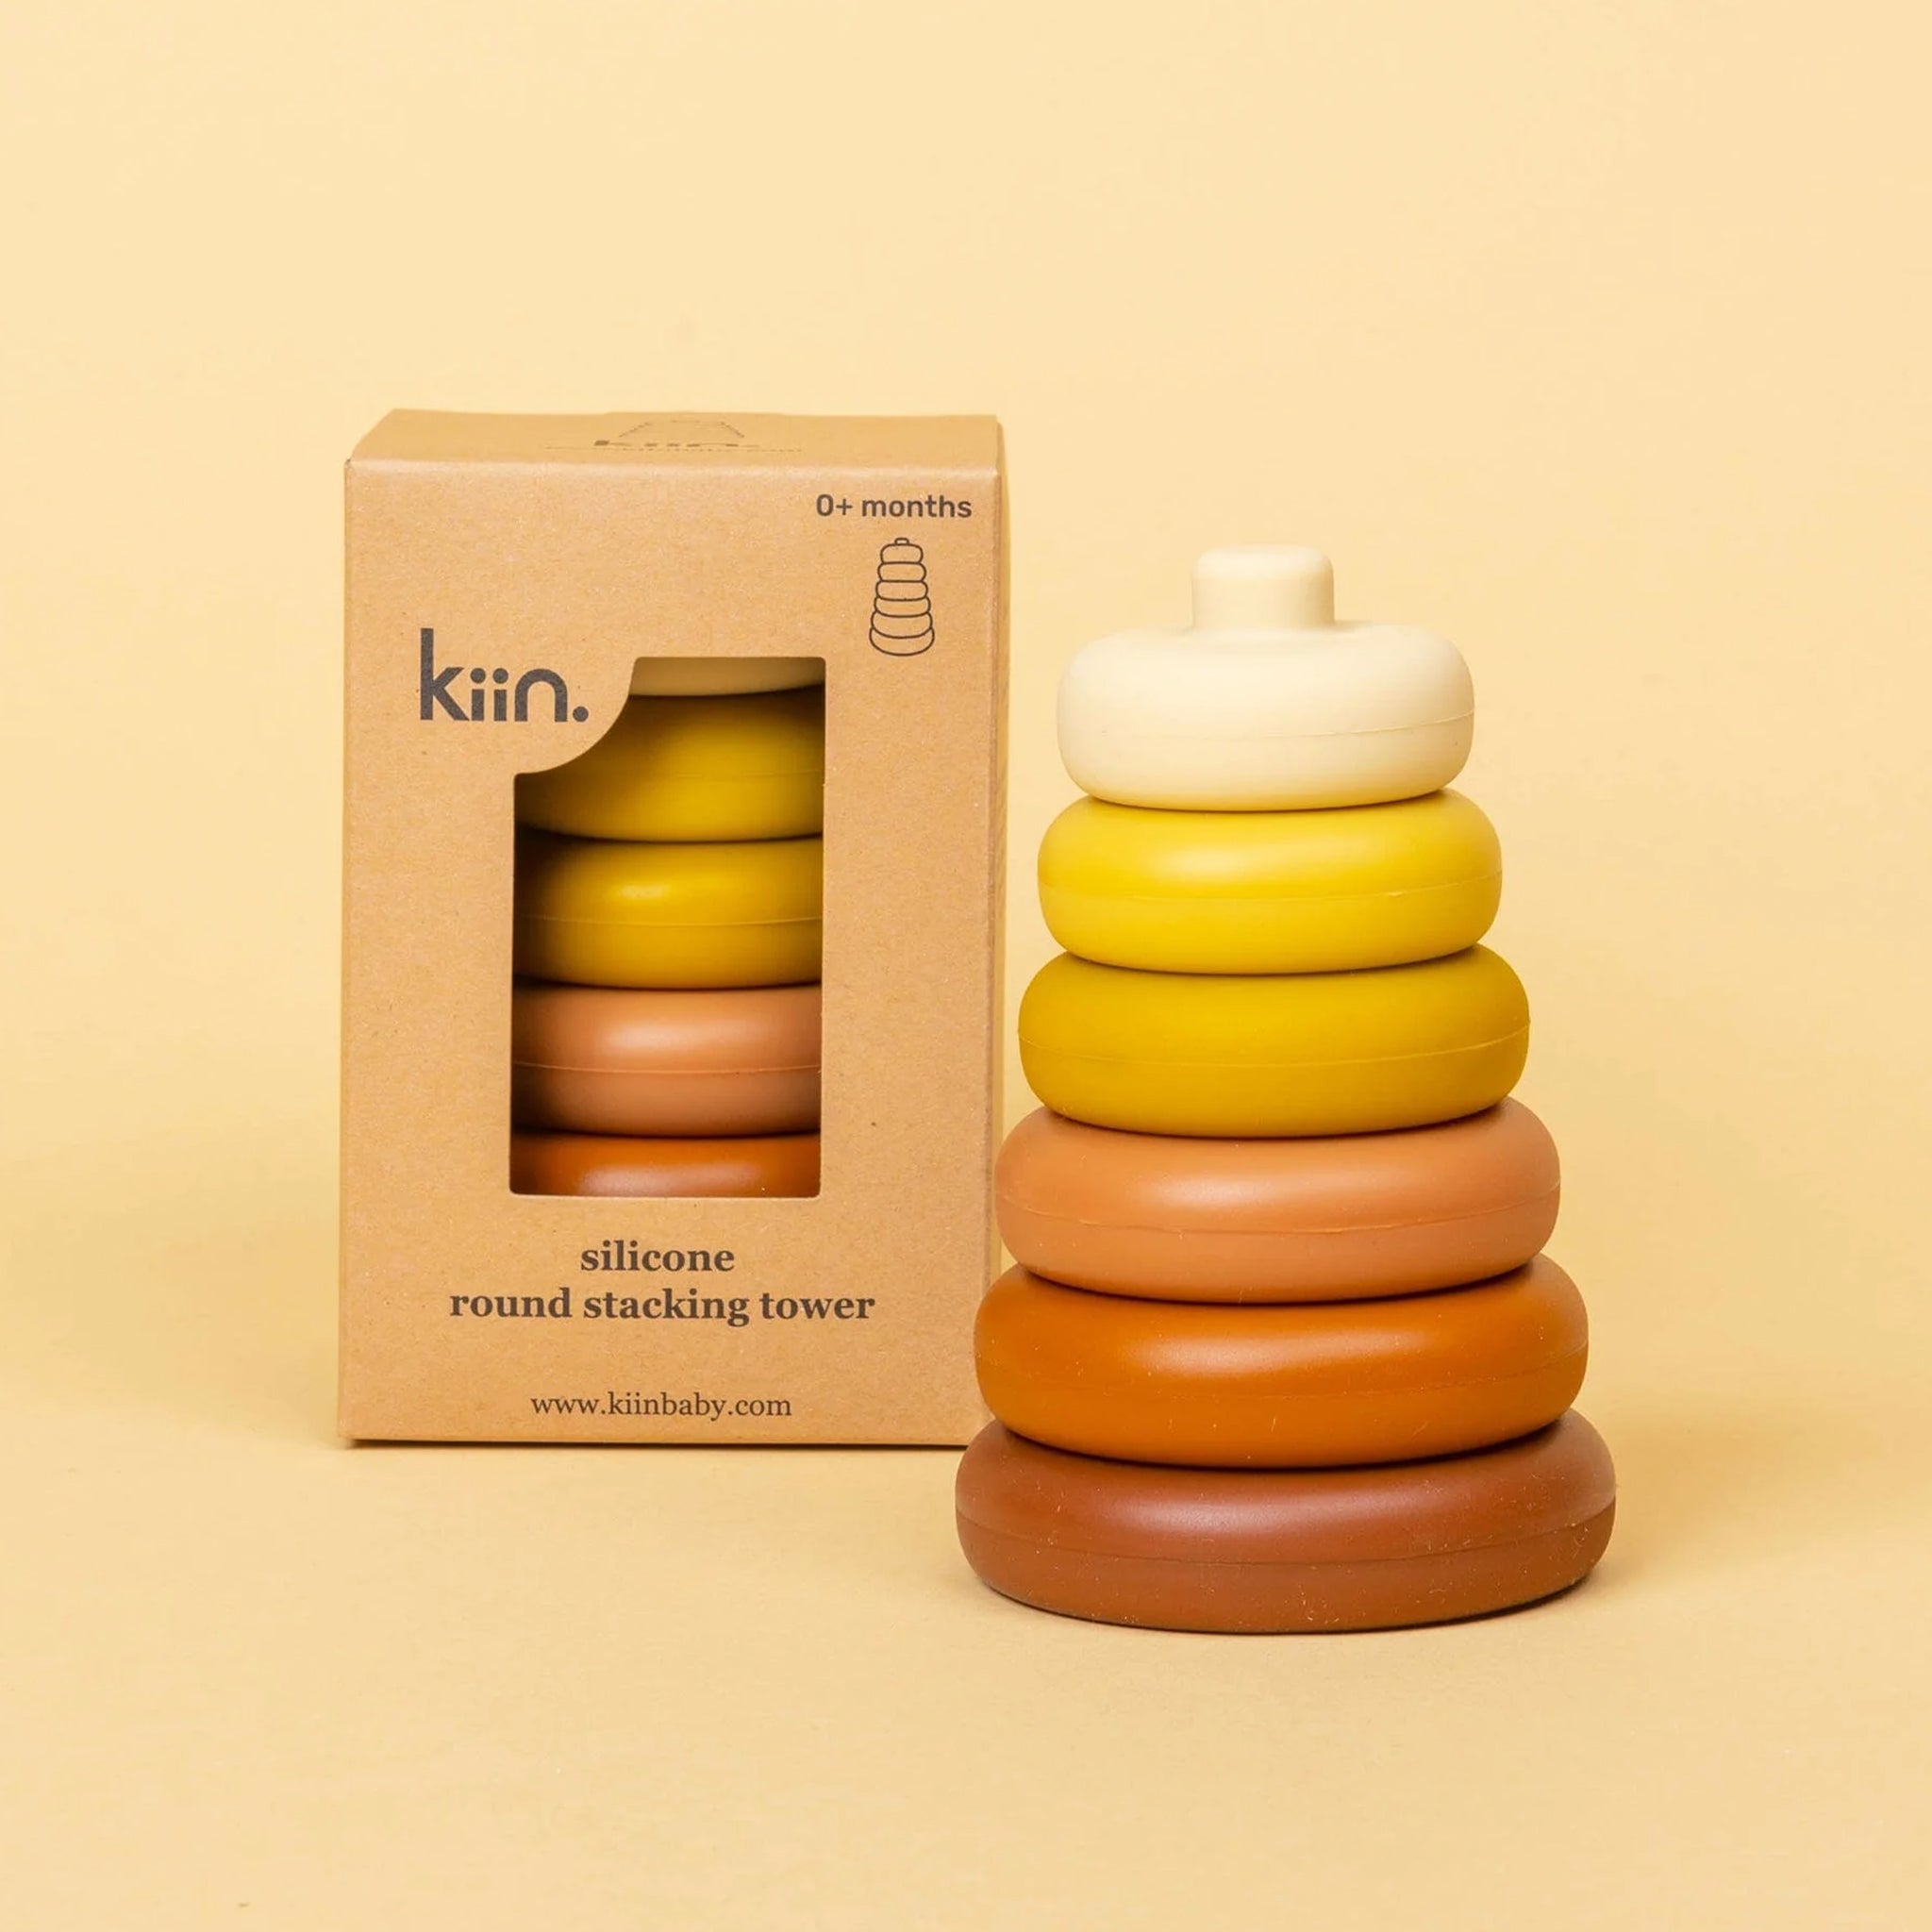 A children's silicone stacking toy in shades of yellow, orange and burnt orange.